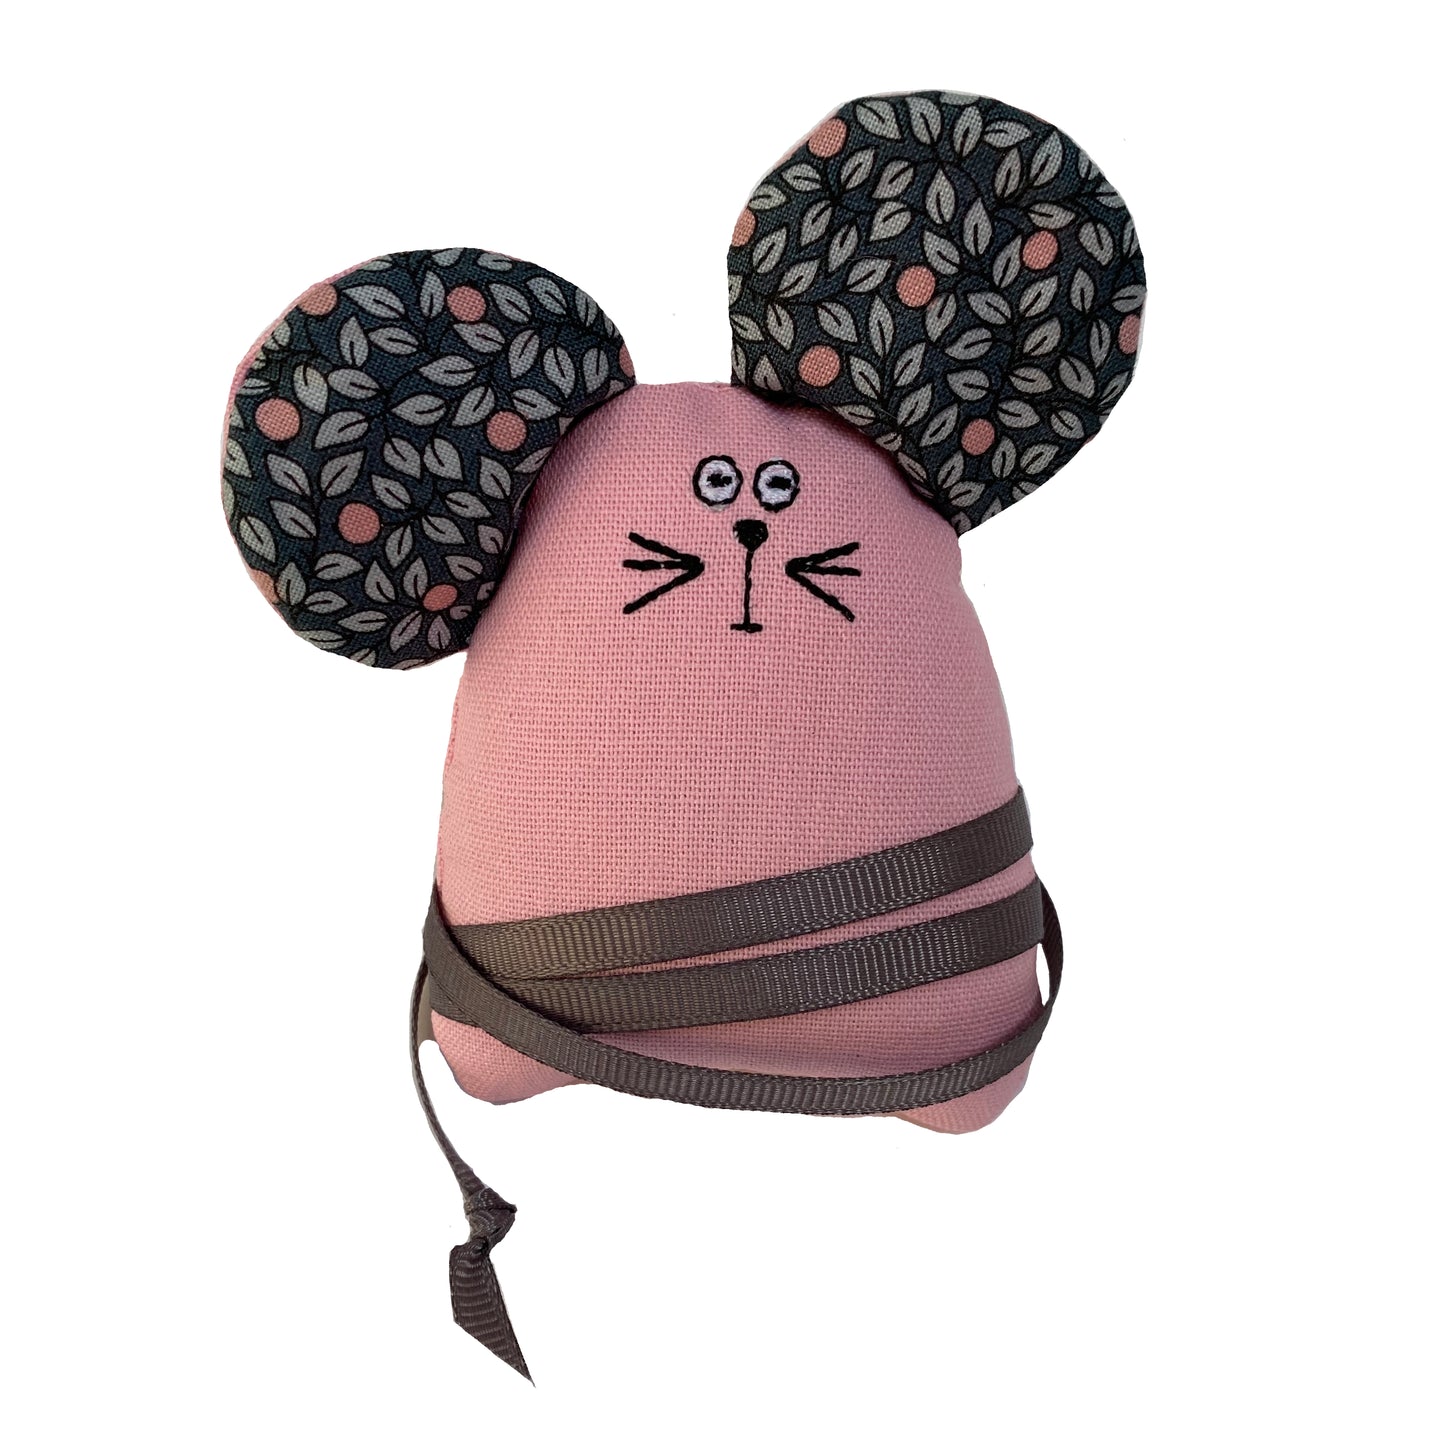 Freak Meowt Luxury Cat Toys, Gifts for Cats Pink Liberty Mouse, Best Cat Toys Handmade in Wales